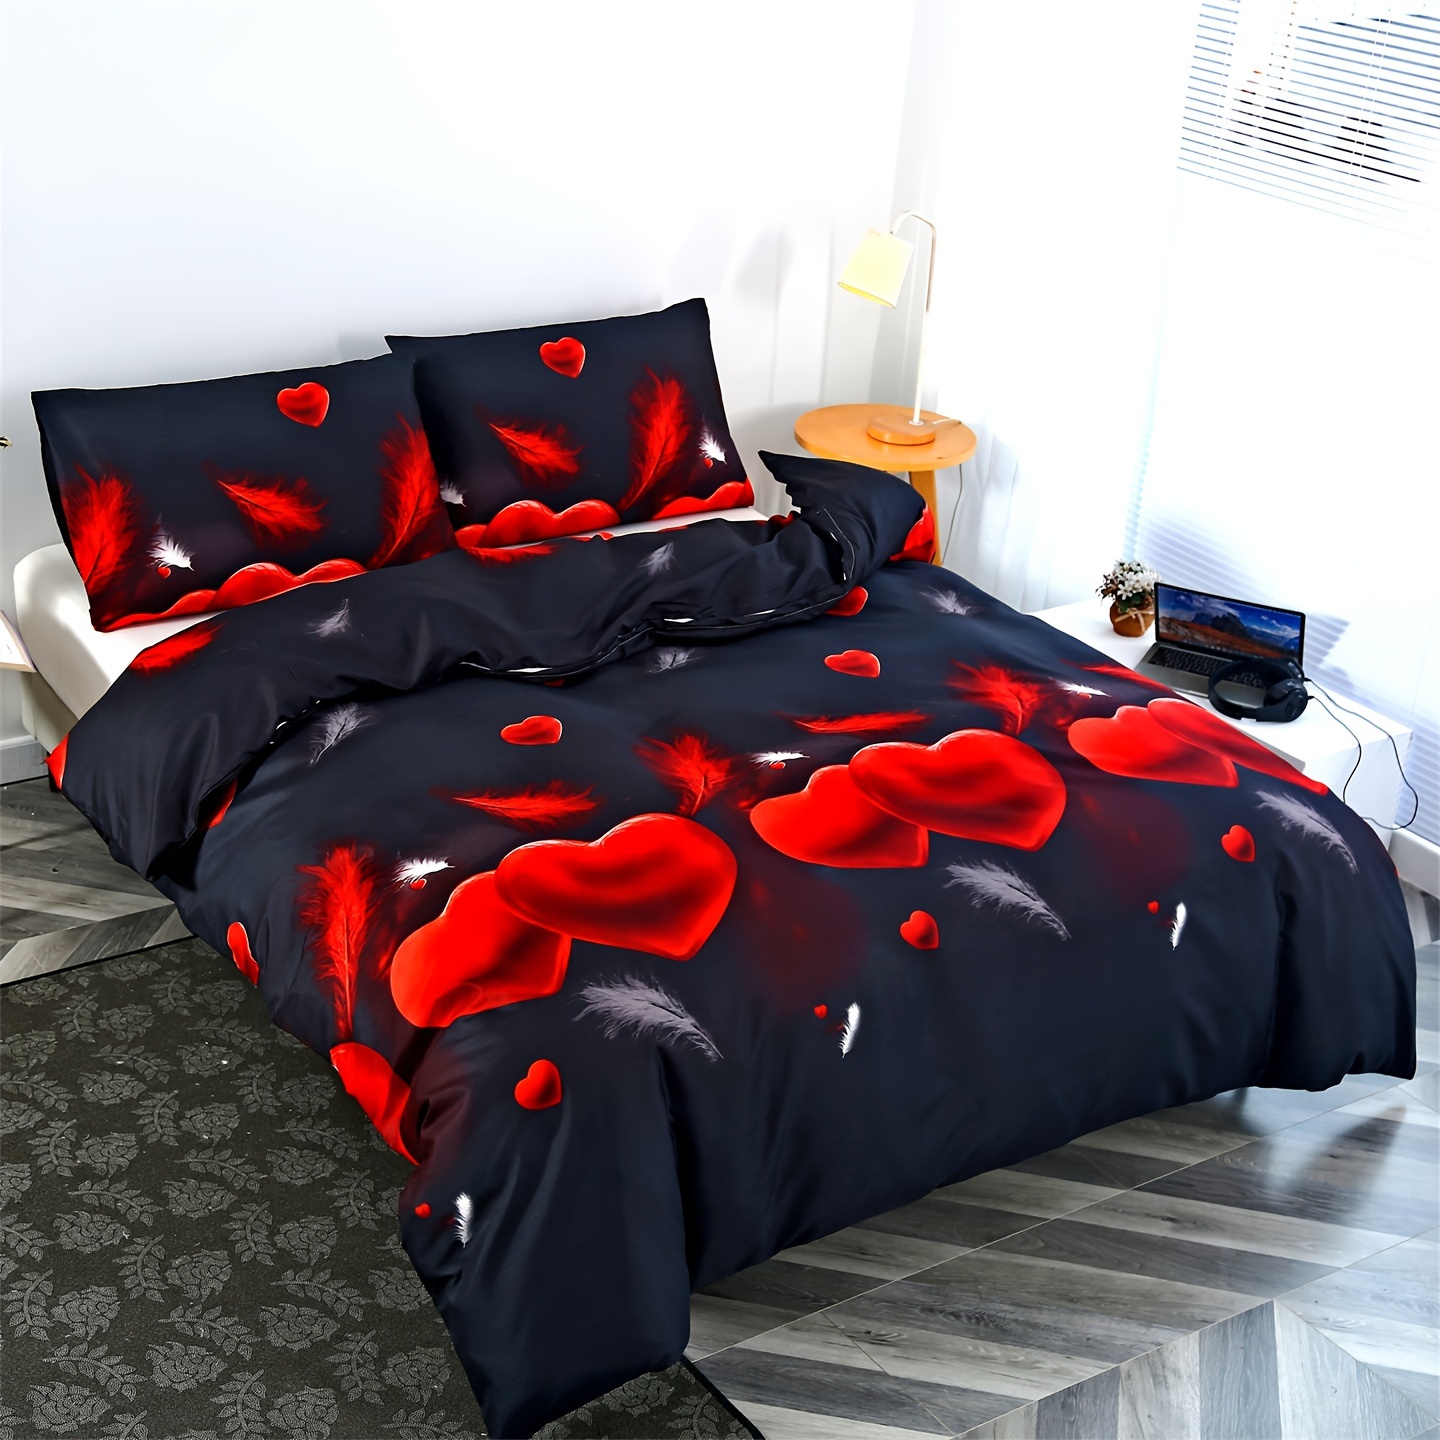 

3pcs Creative Graphic Love Print Bedding Quilt Cover Set, Soft And Comfortable, Suitable For Bedroom, Guest Room (one Quilt Cover + 2 Pillow Cases, No Core)